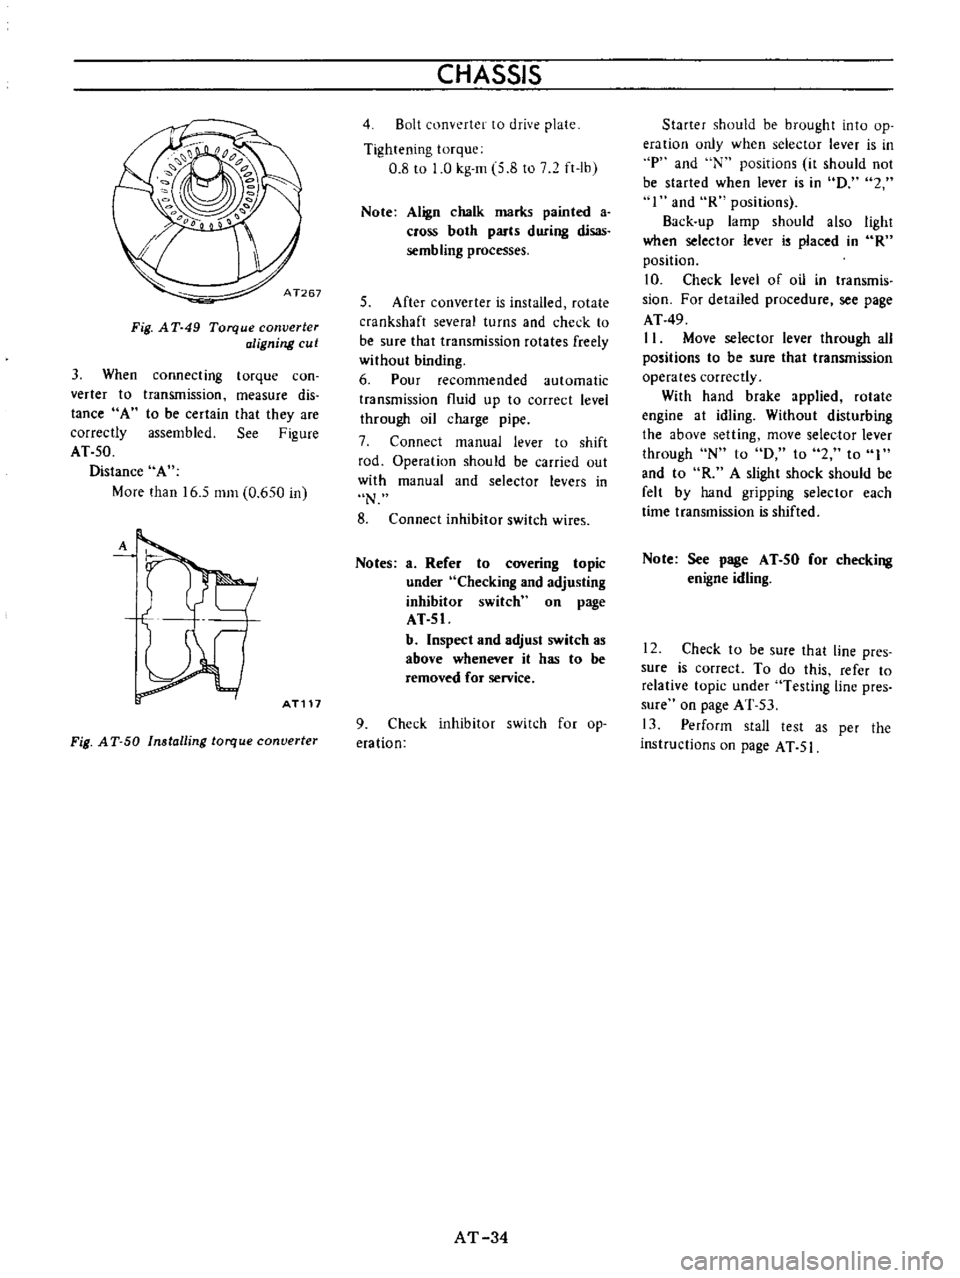 DATSUN B110 1973  Service Repair Manual 
Fig 
A 
T 
49

Torque 
converter

aligning 
cut

3 
When

connecting 
torque 
con

verter

to 
transmission

measure 
dis

tance 
A

to 
be

certain 
that

they 
are

correctly 
assembled 
See

Figur